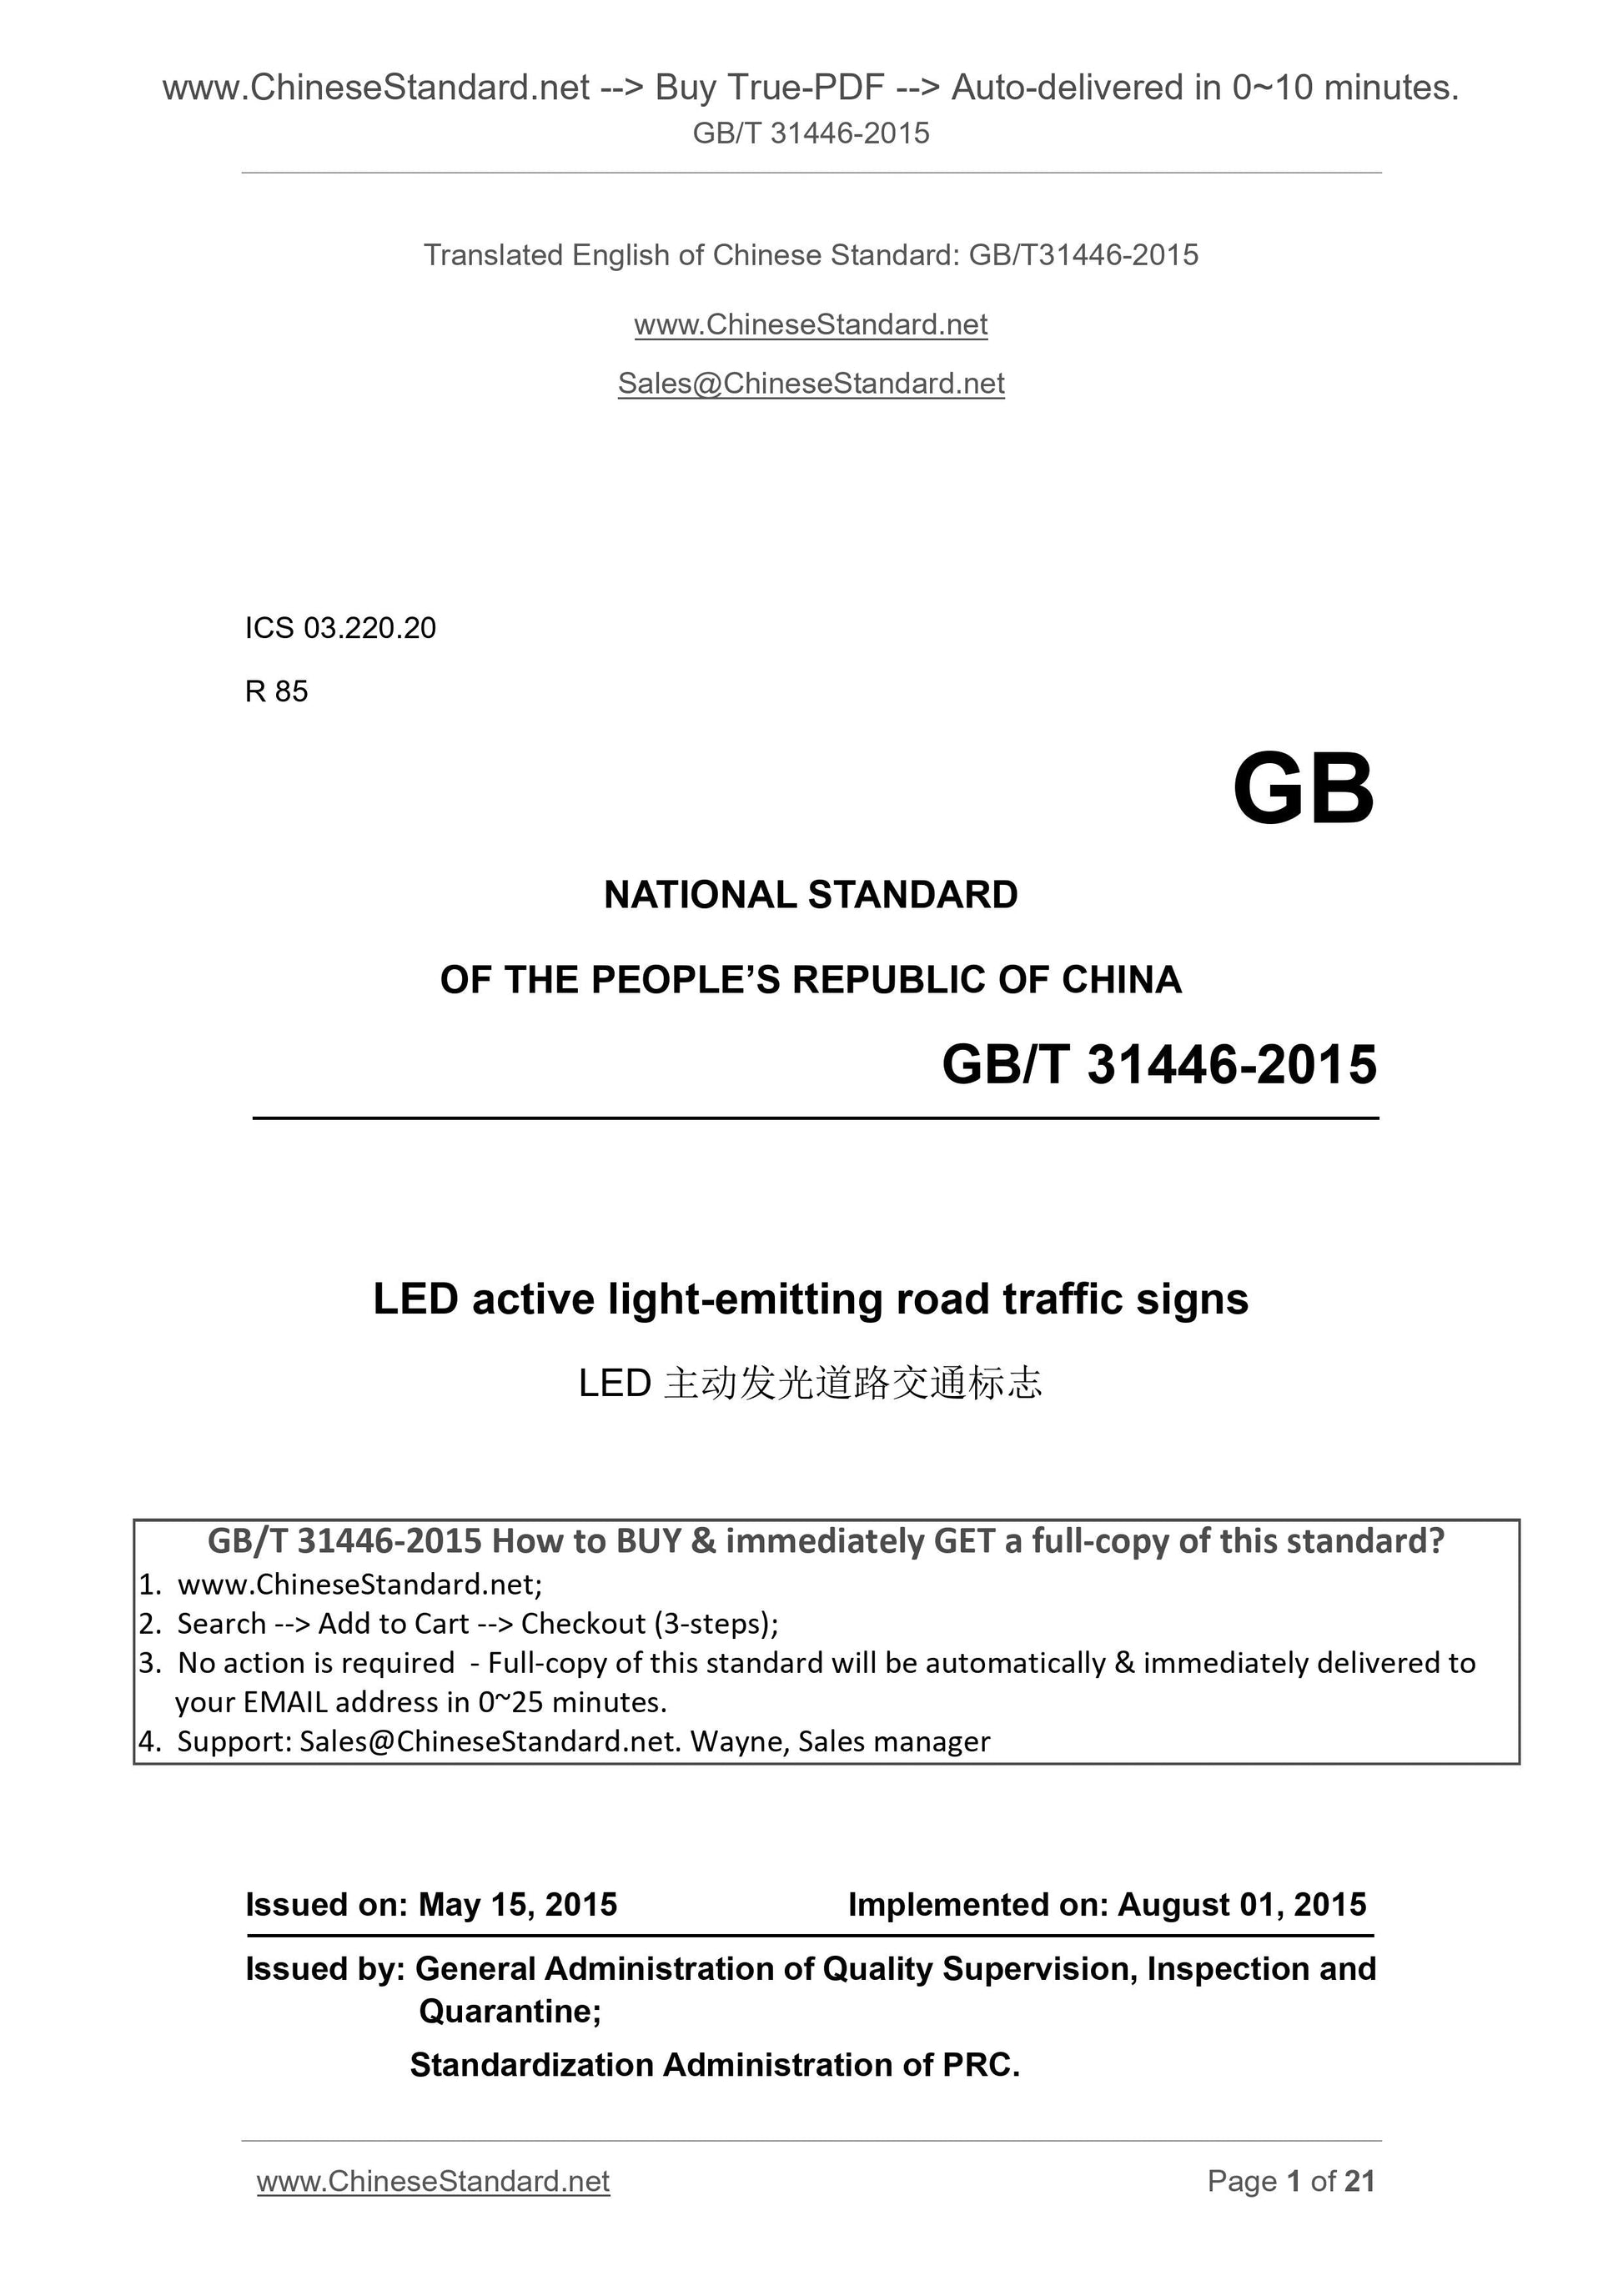 GB/T 31446-2015 Page 1